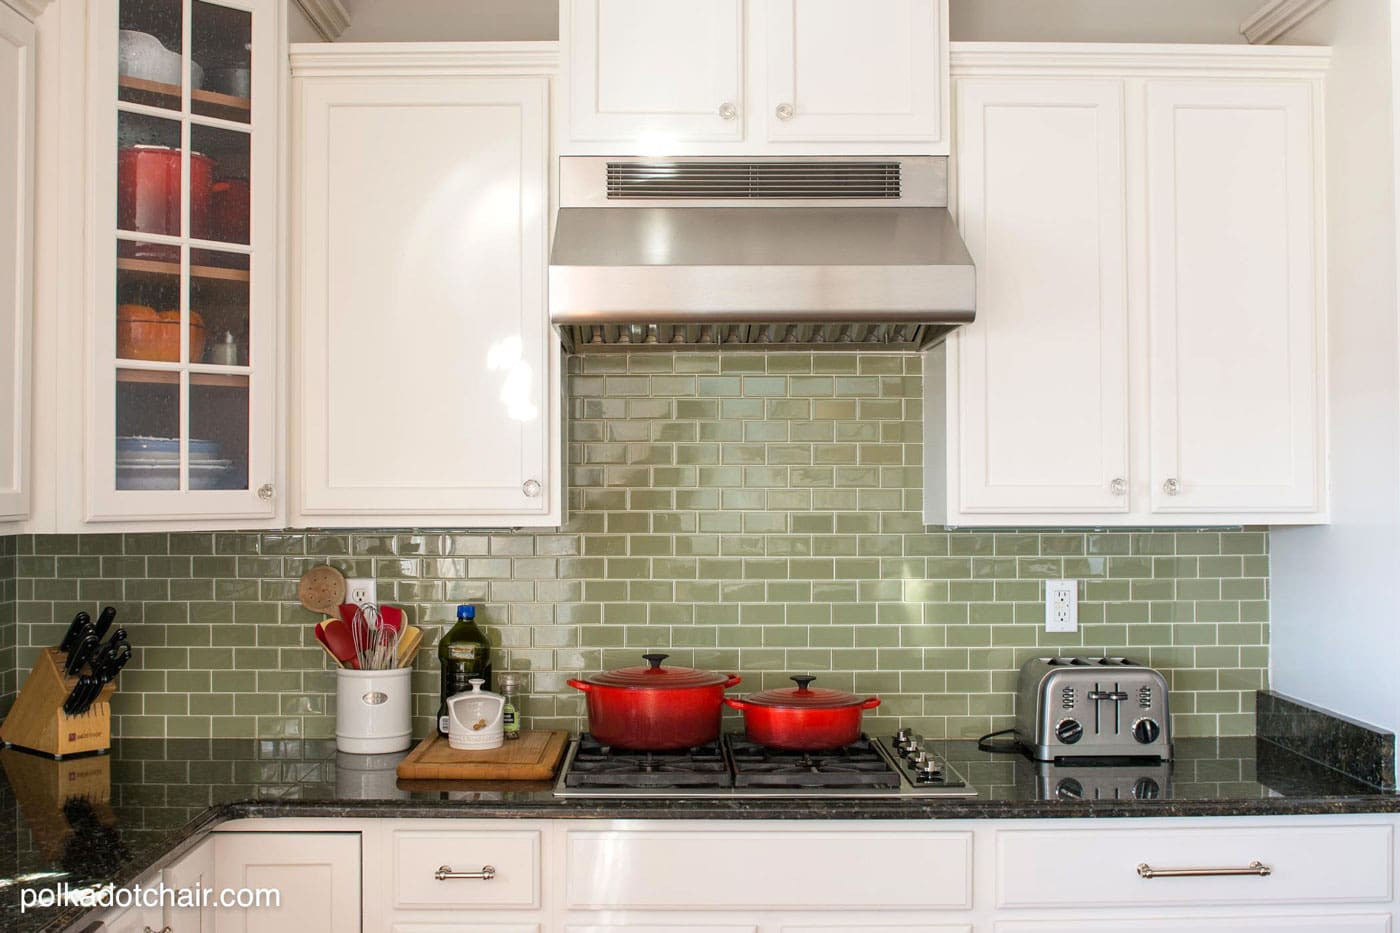 Painted Backsplash Ideas Kitchen
 Painted Kitchen Cabinet Ideas and Kitchen Makeover Reveal